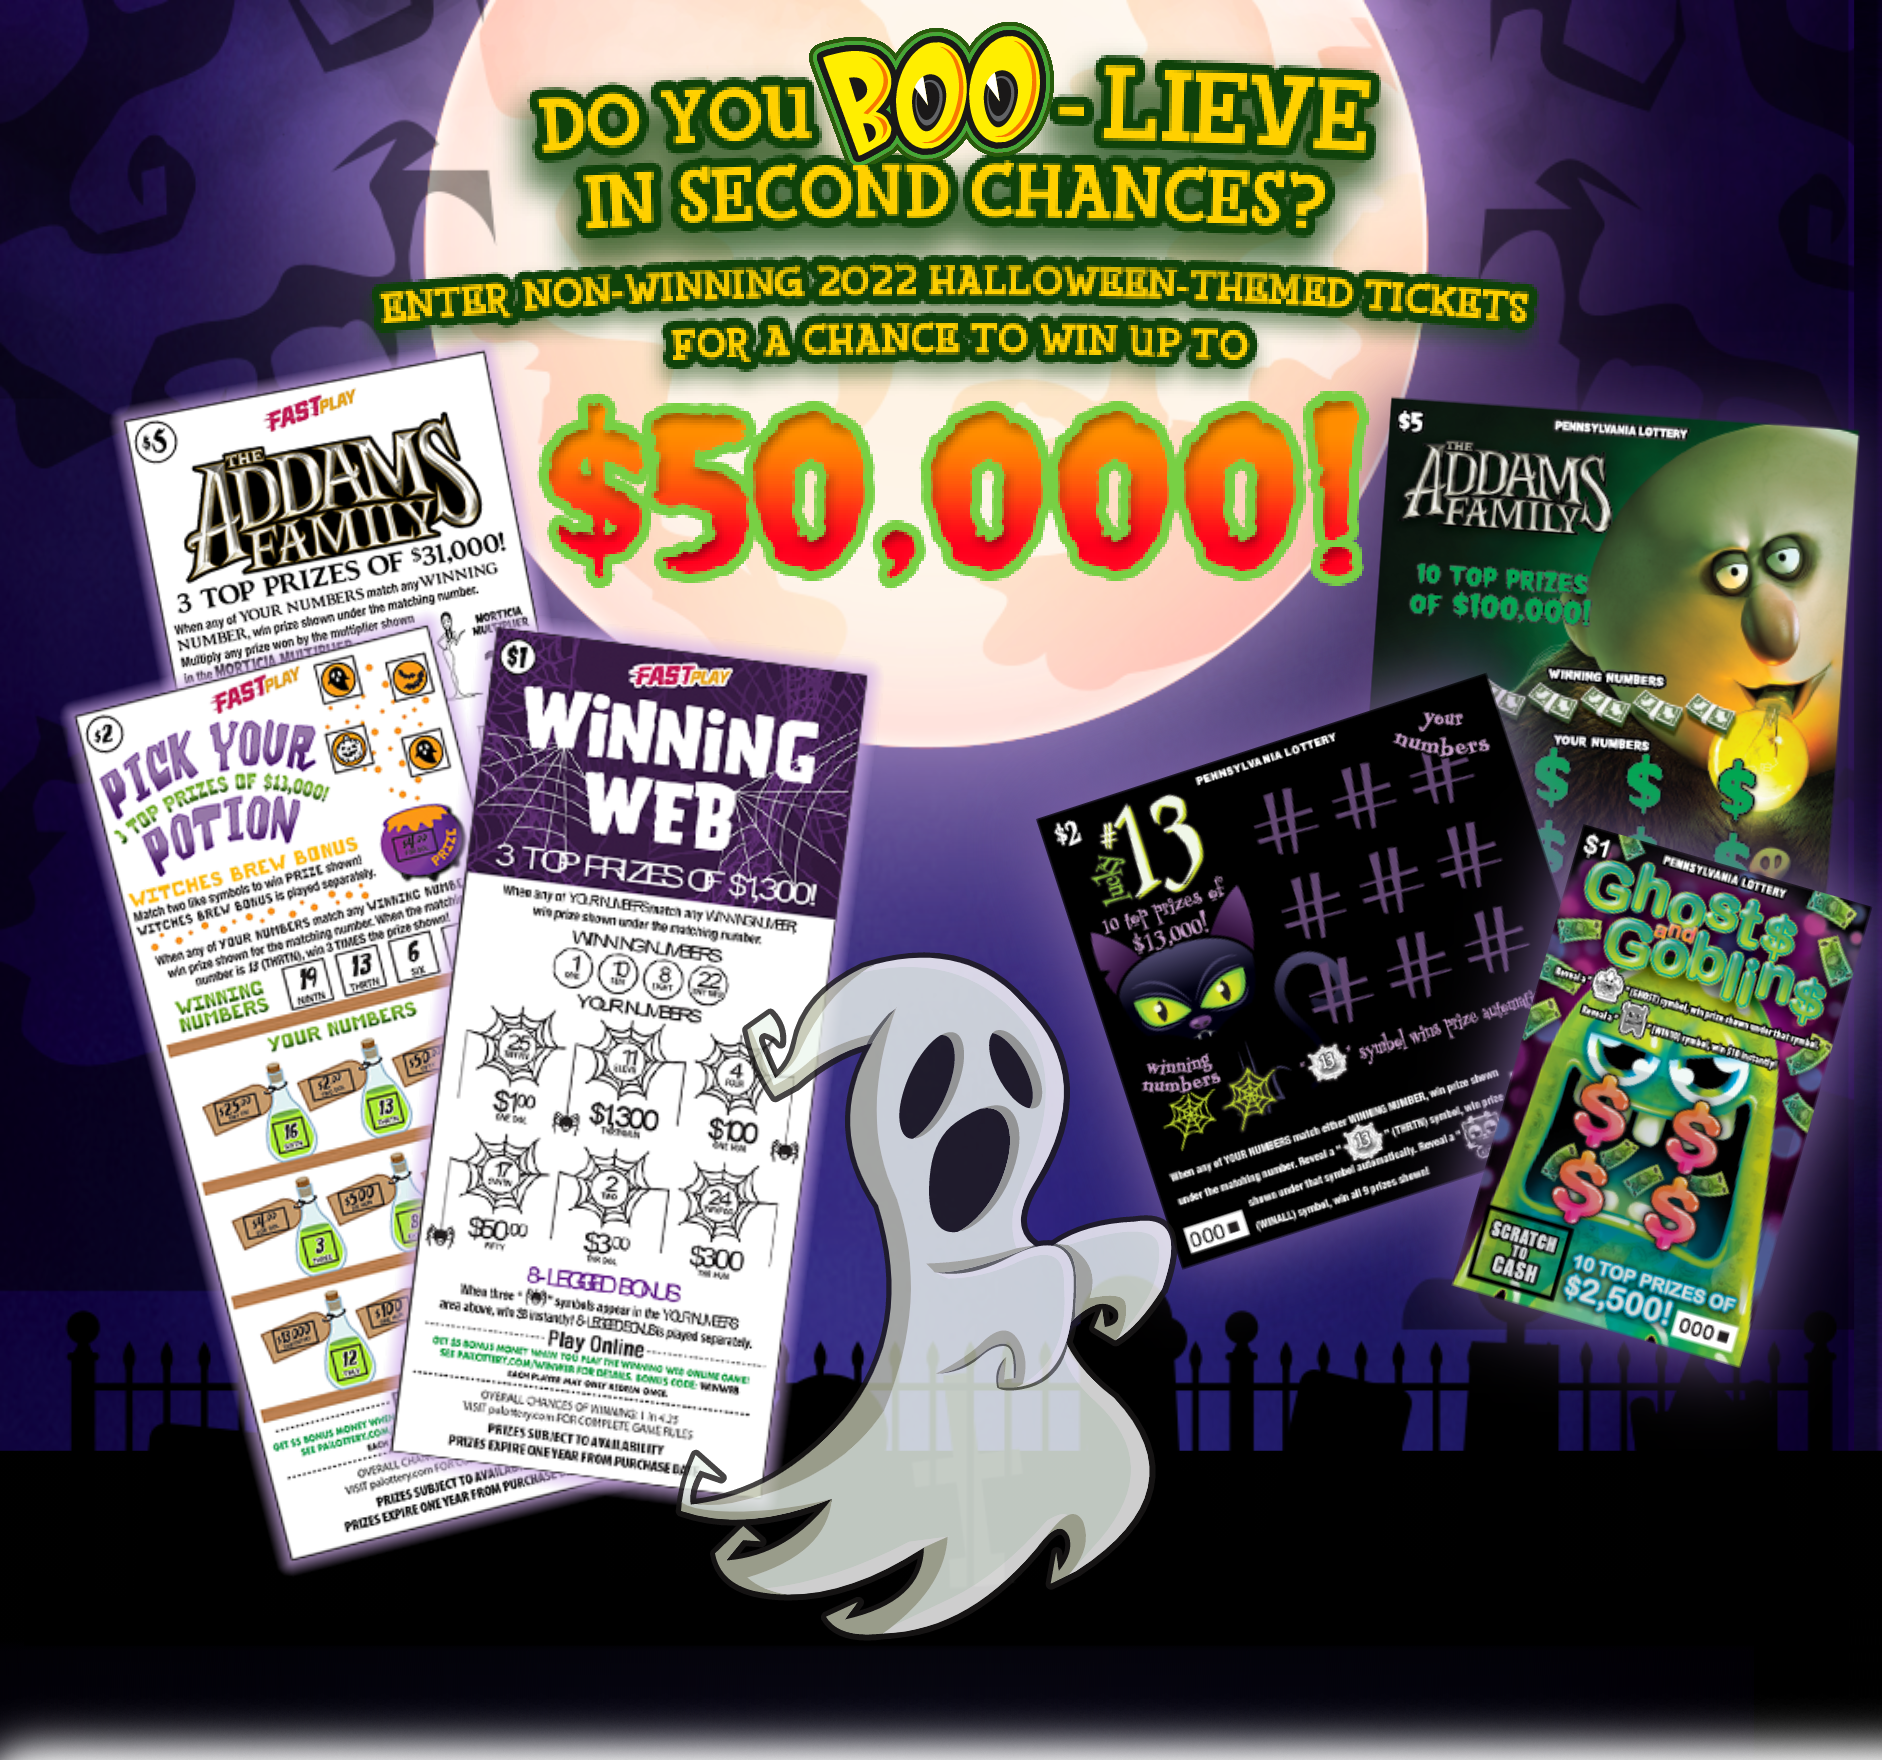 Do you boolieve in second chances? Enter non-winning 2022 halloween-themed tickets for a chance to win up to $50,000!